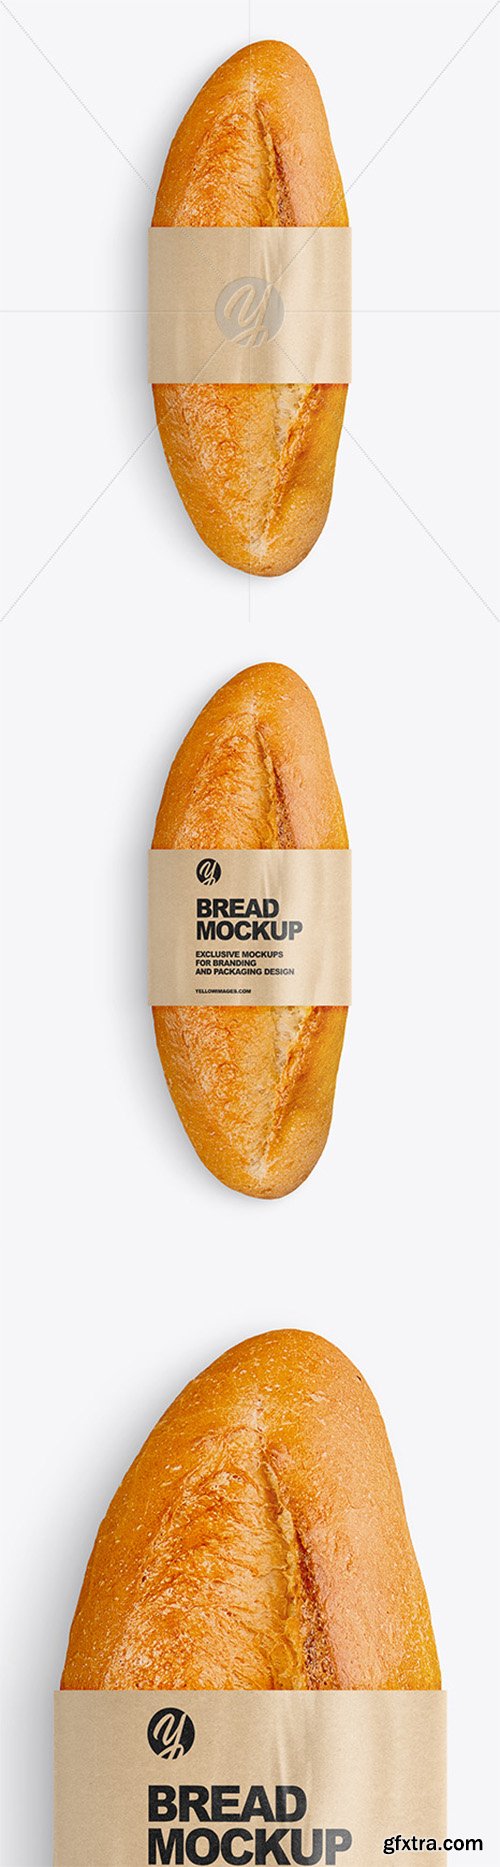 Bread with Label Mockup 76797